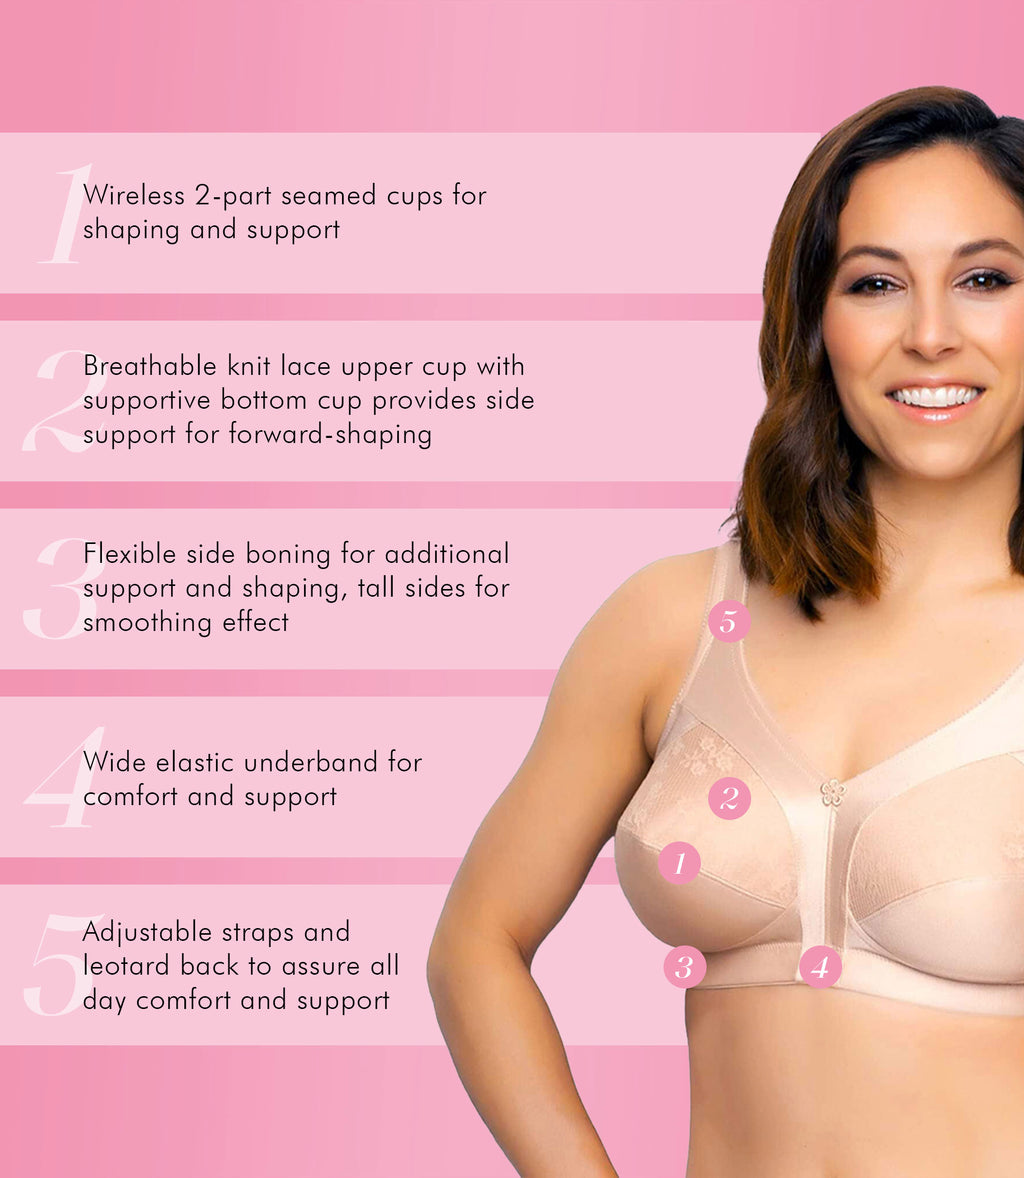 Lace bra 38B breathable cup; underwire for additional support